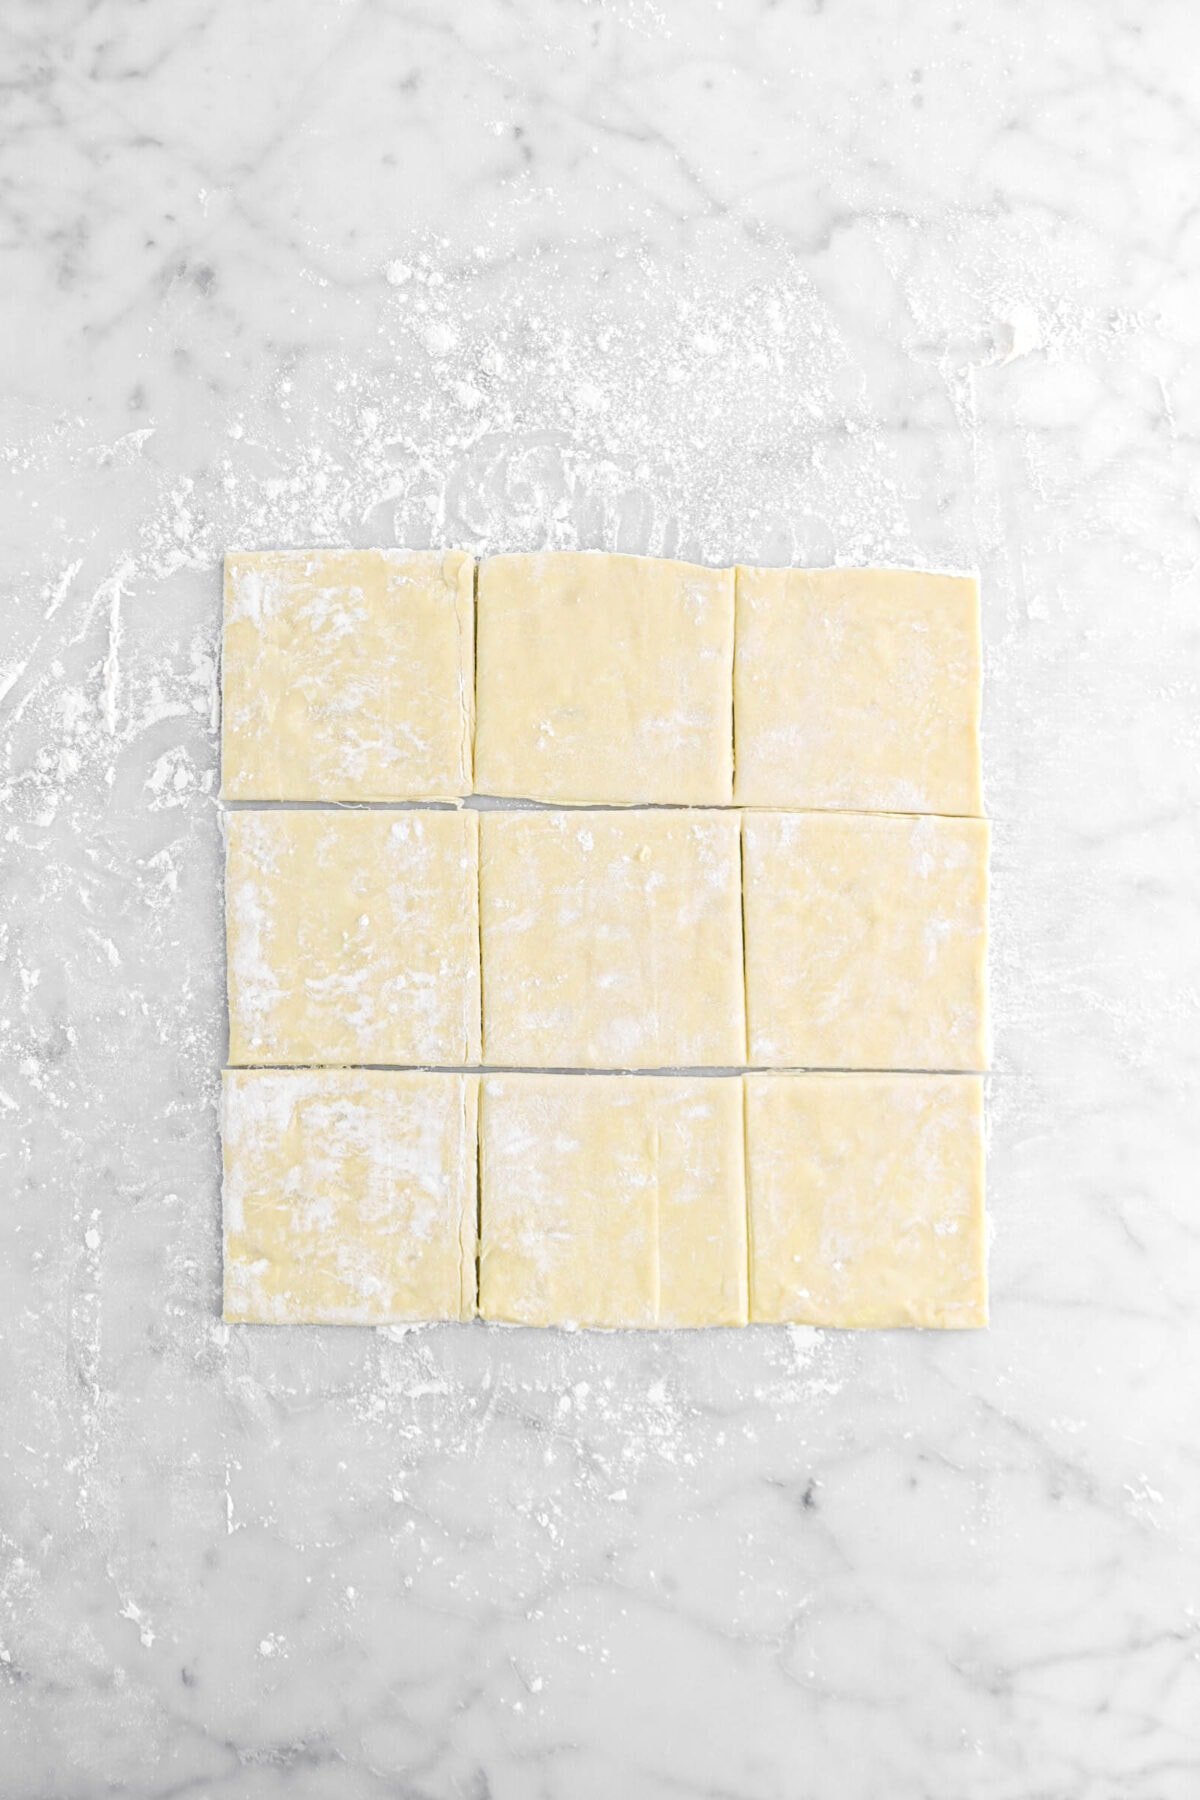 nine small squares of puff pastry on marble surface.